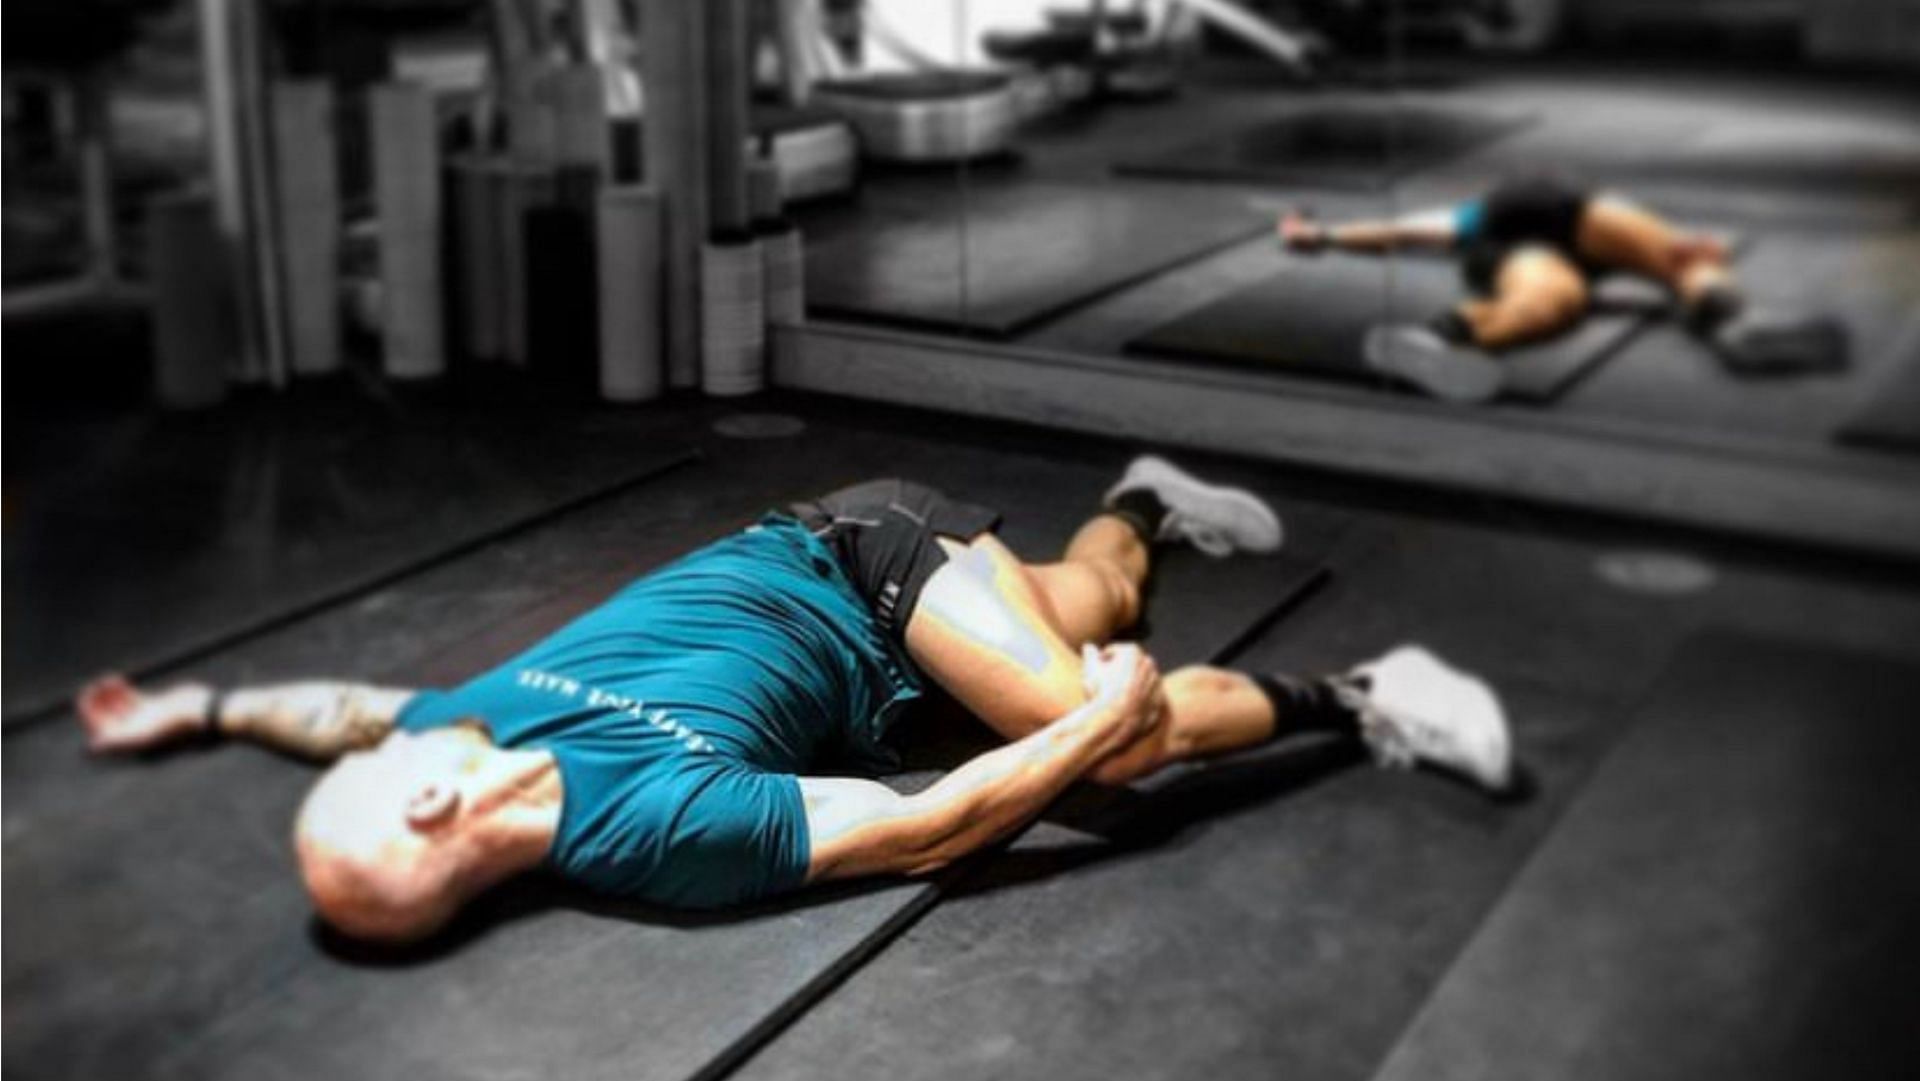 The lying crossover stretch is a full-body stretching exercise. (Photo via Instagram/embracethegrinduk)